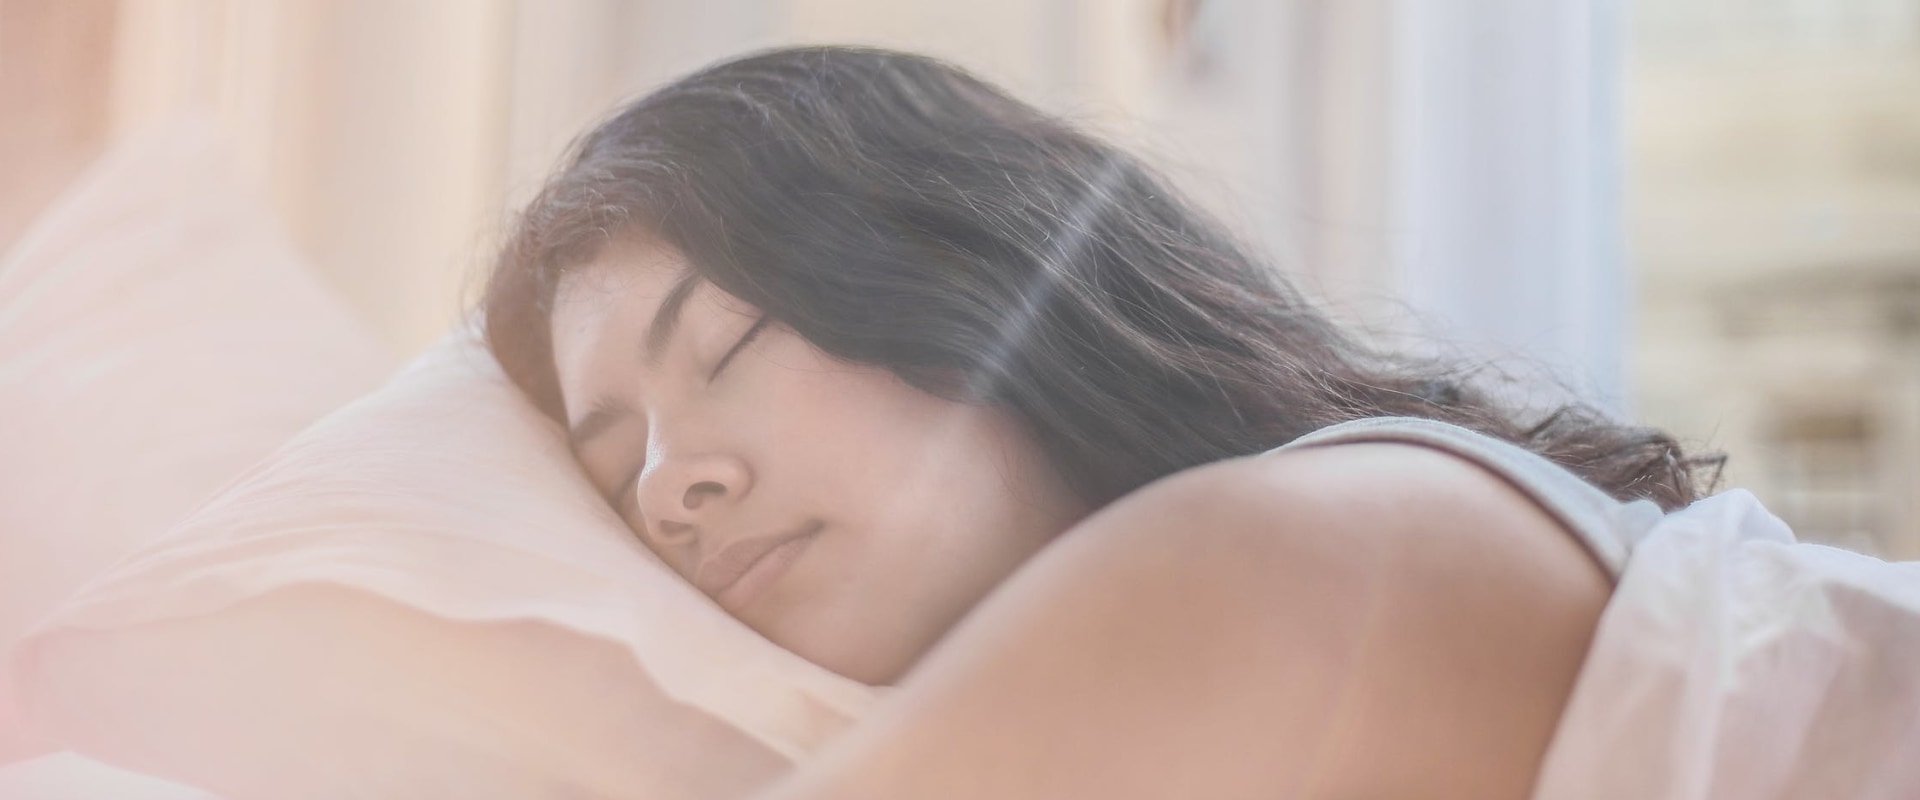 The Interconnected Relationship between Sleep and Mental Well-Being